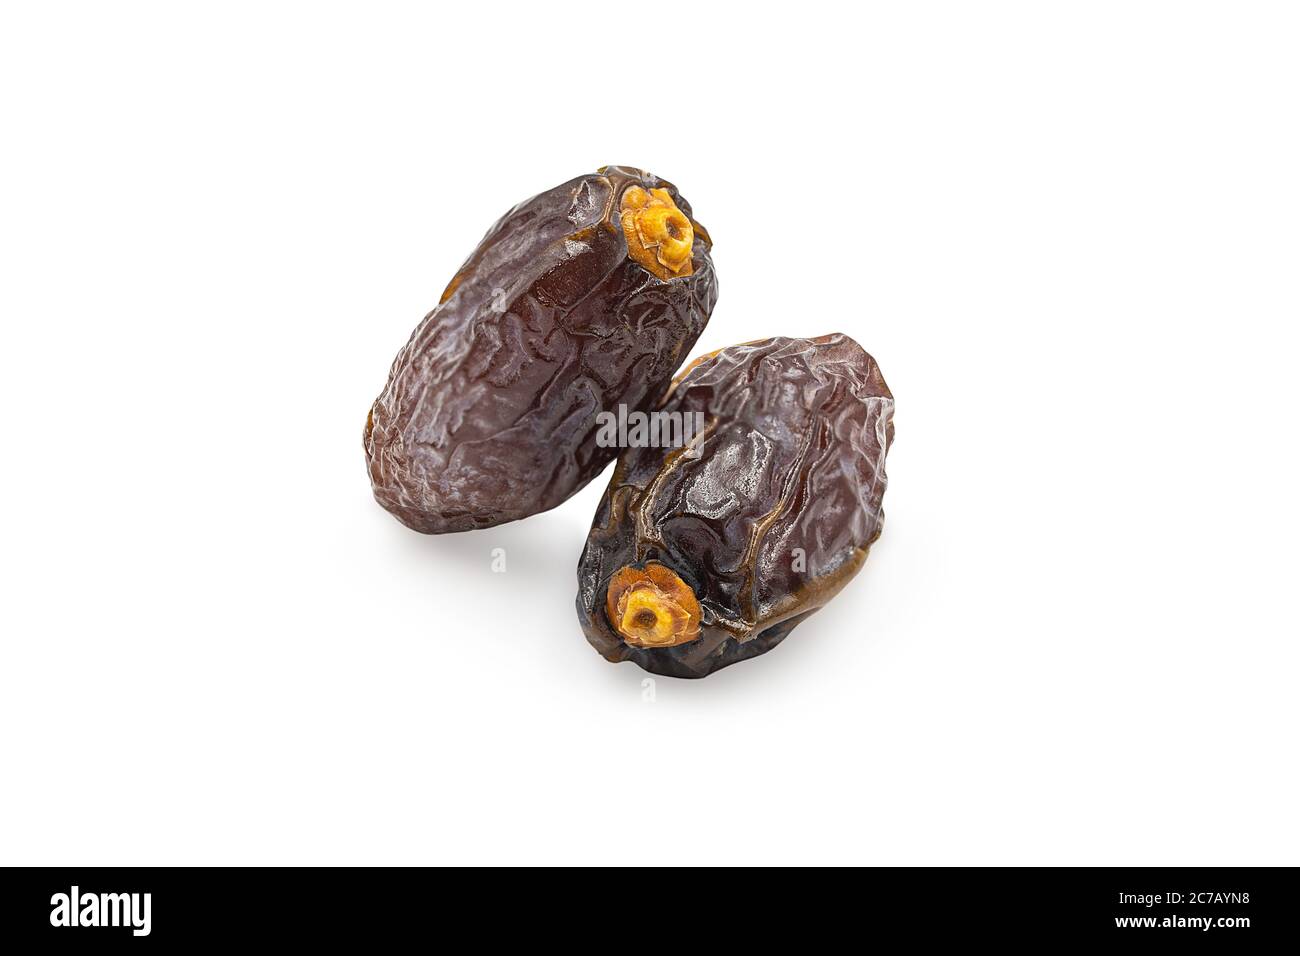 Dried Medjoul date fruit on white isolated background with clipping path. Dates palm is food for Ramadan or medjool month. Delicious dried fruit with Stock Photo